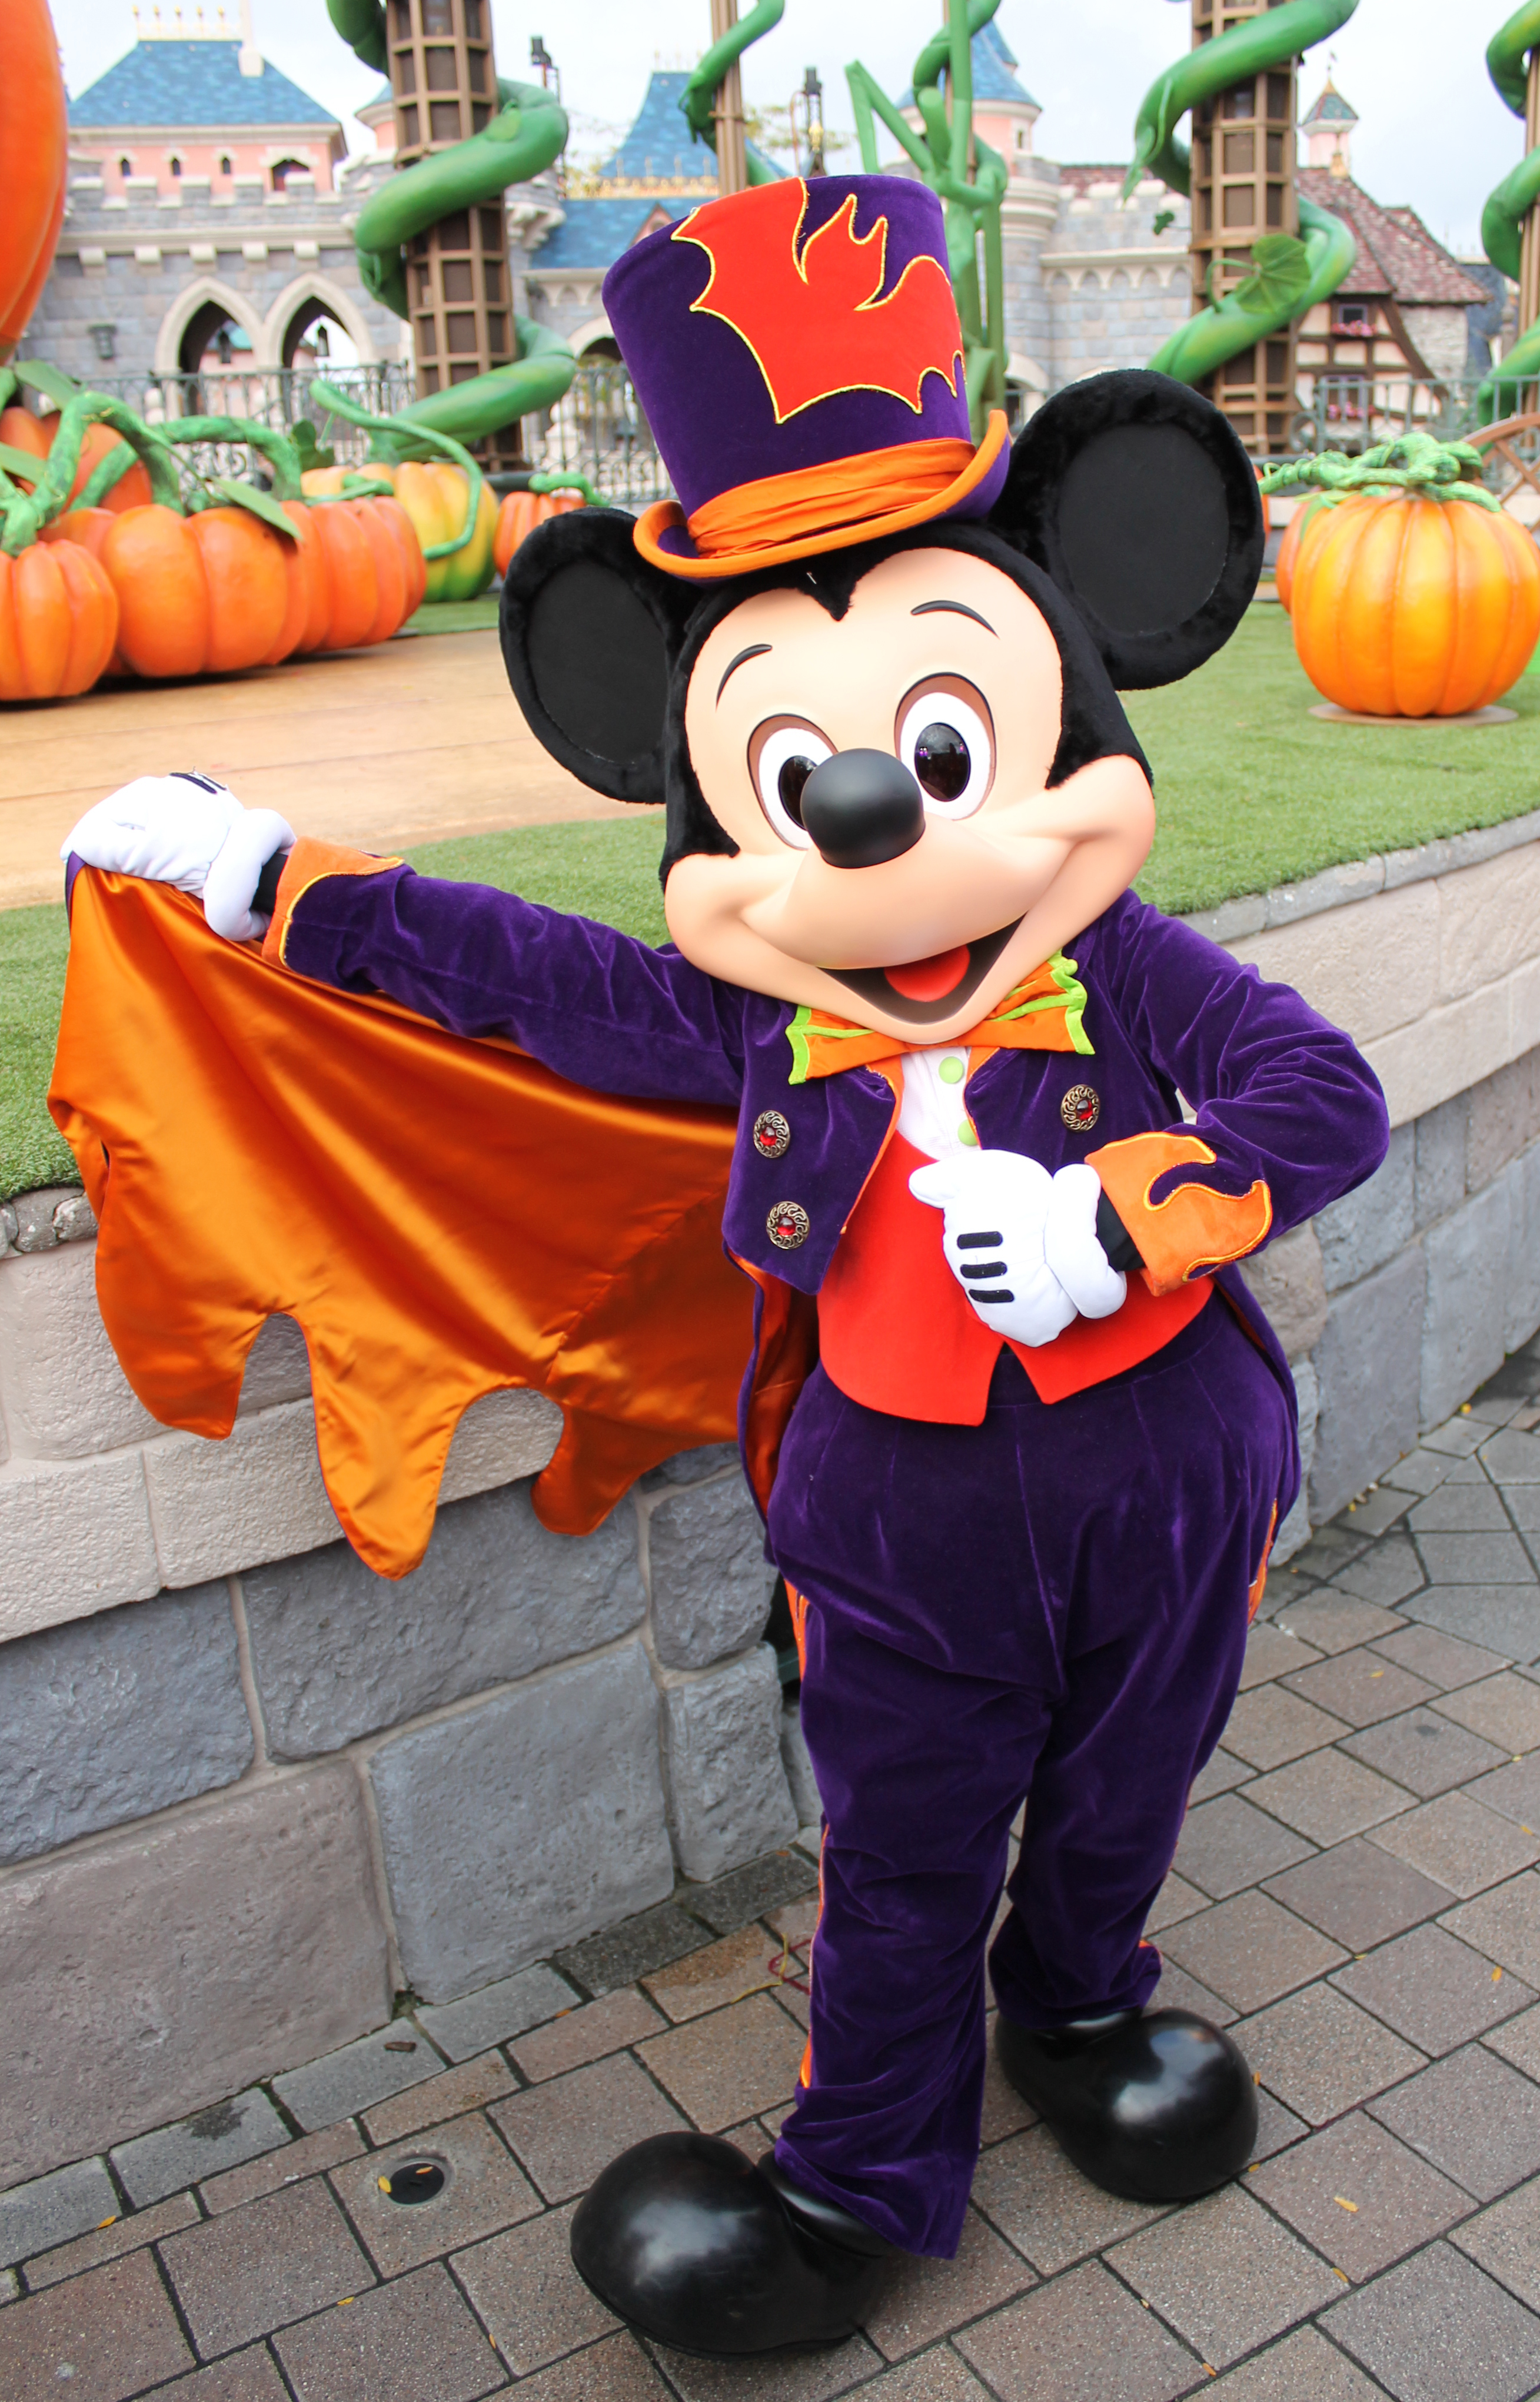 Mickey wore this outfit at the Halloween Show during Halloween Season 2011 & 2012 and the 2012 Halloween Party.